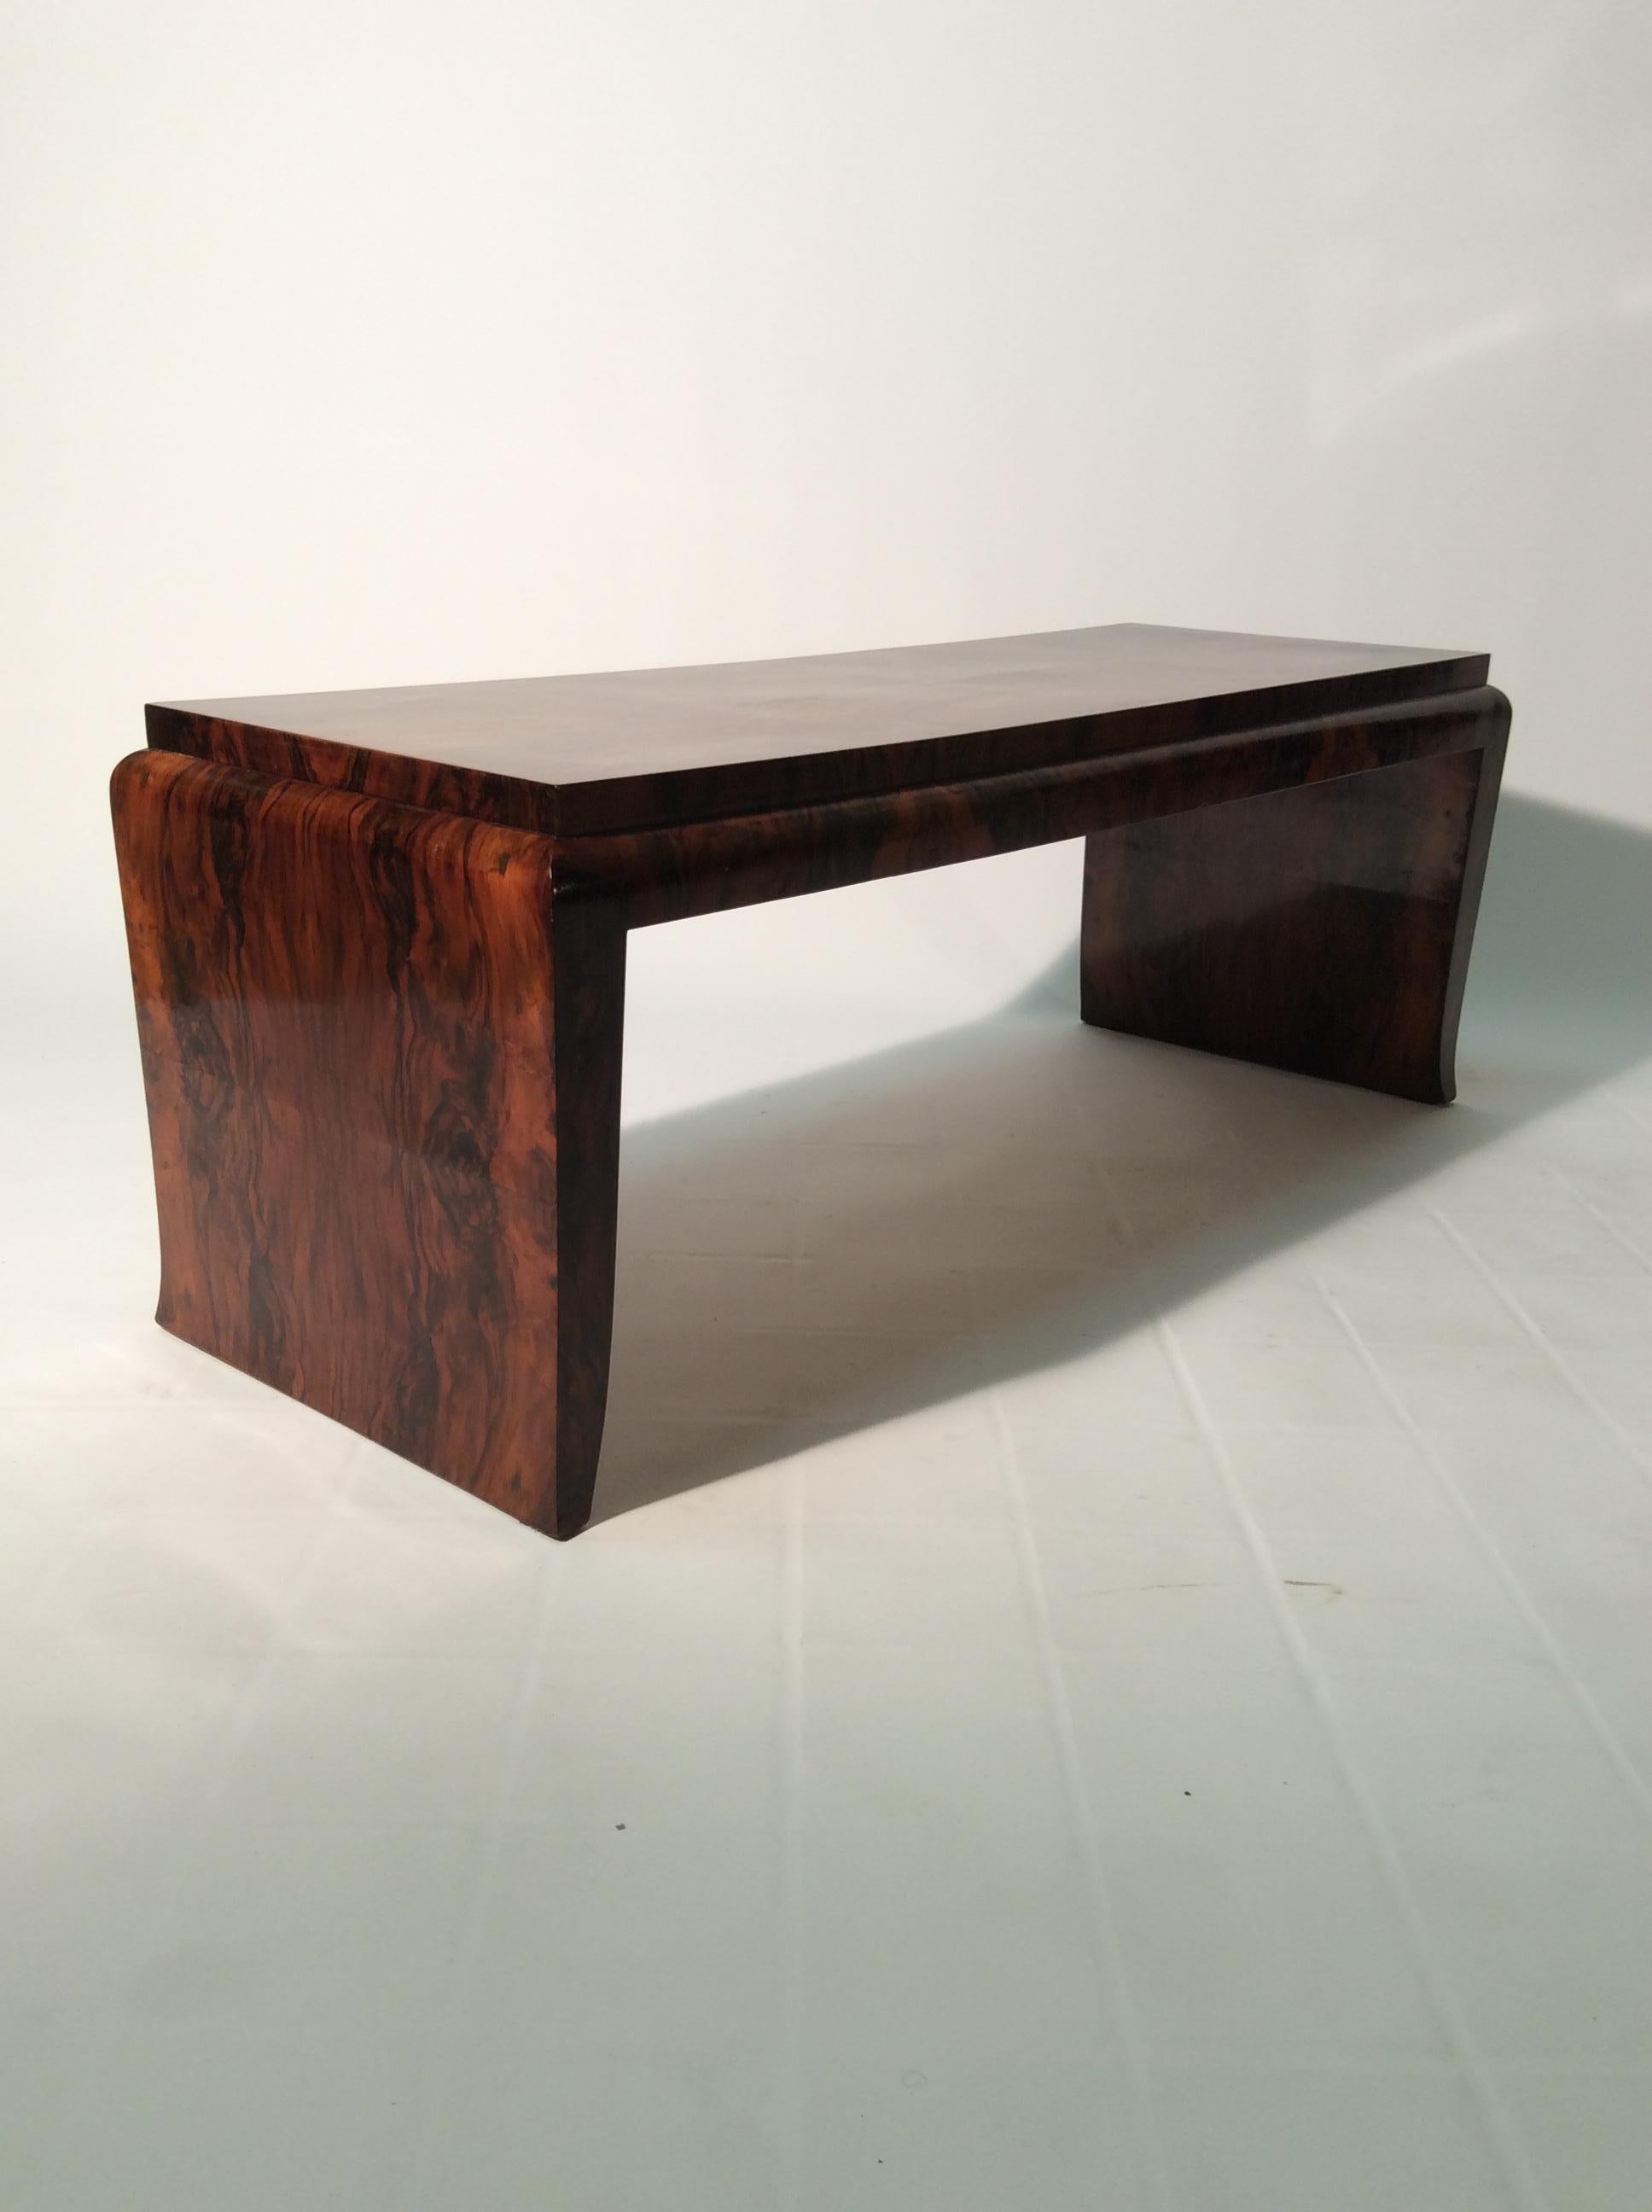 Italian Art Deco Rectangular Coffee Table or Bench with Precious and Elegant Material